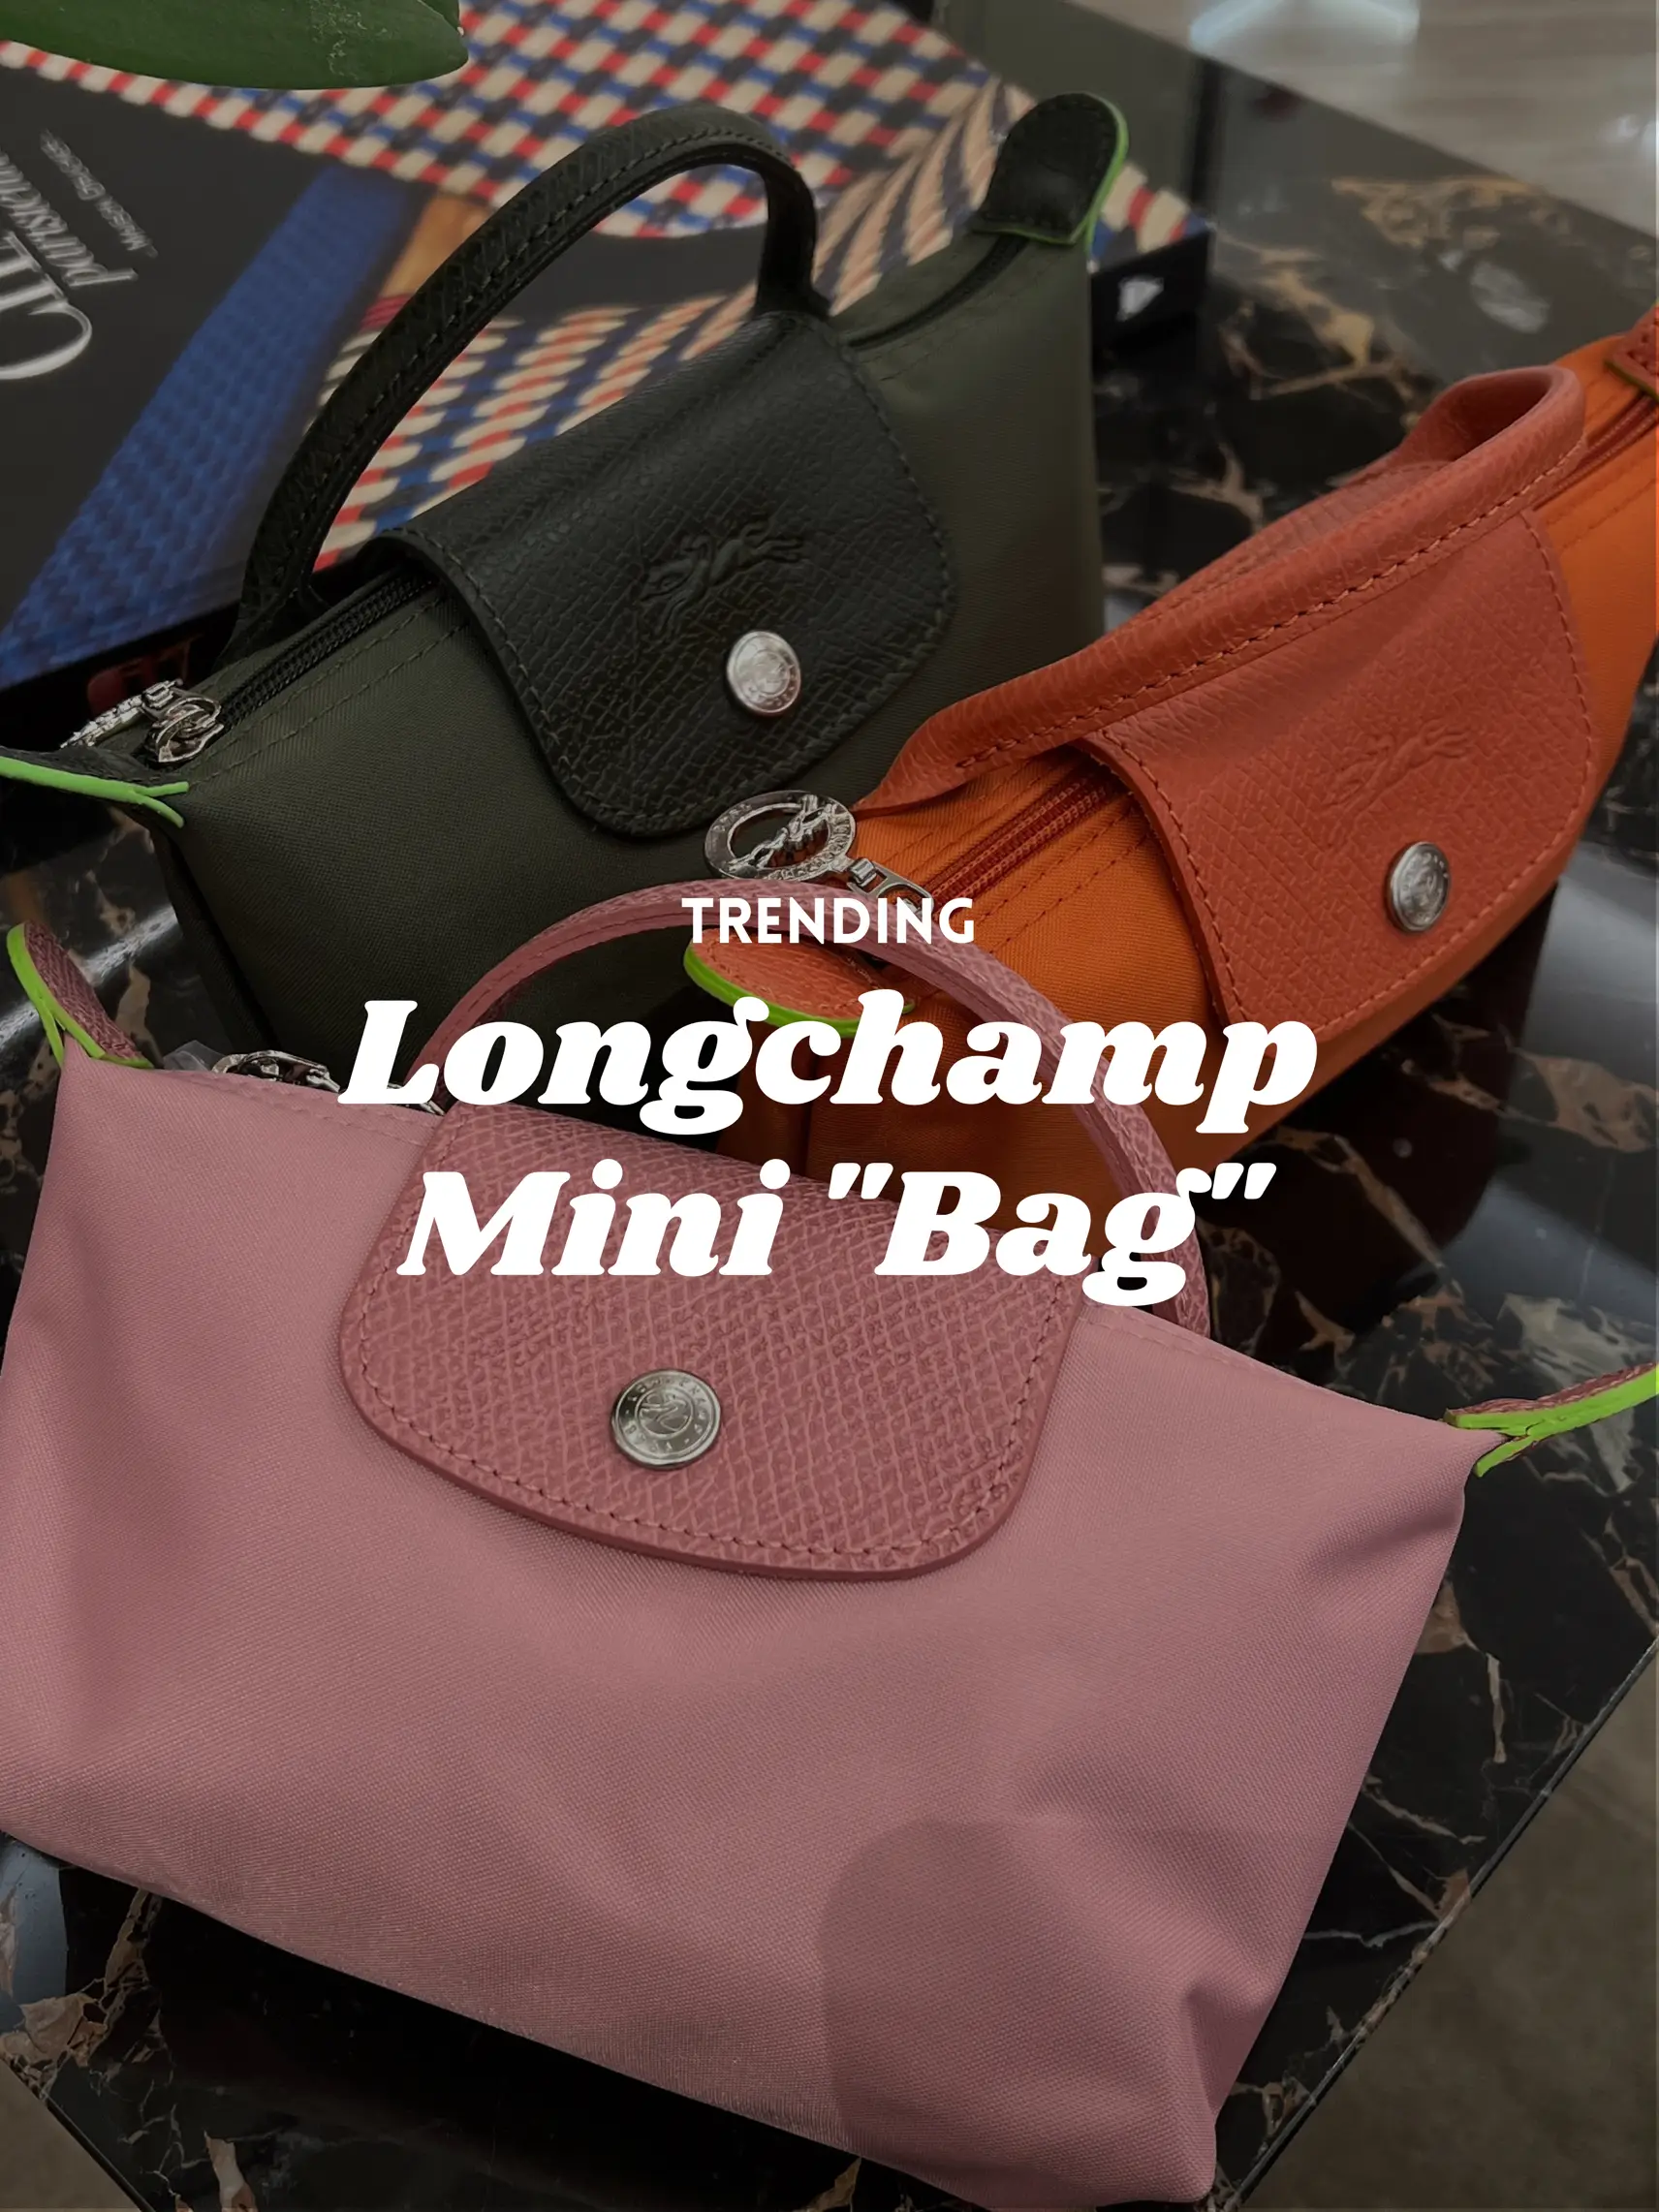 obsessed with this #minibag #longchamplepliagegreen #fashion